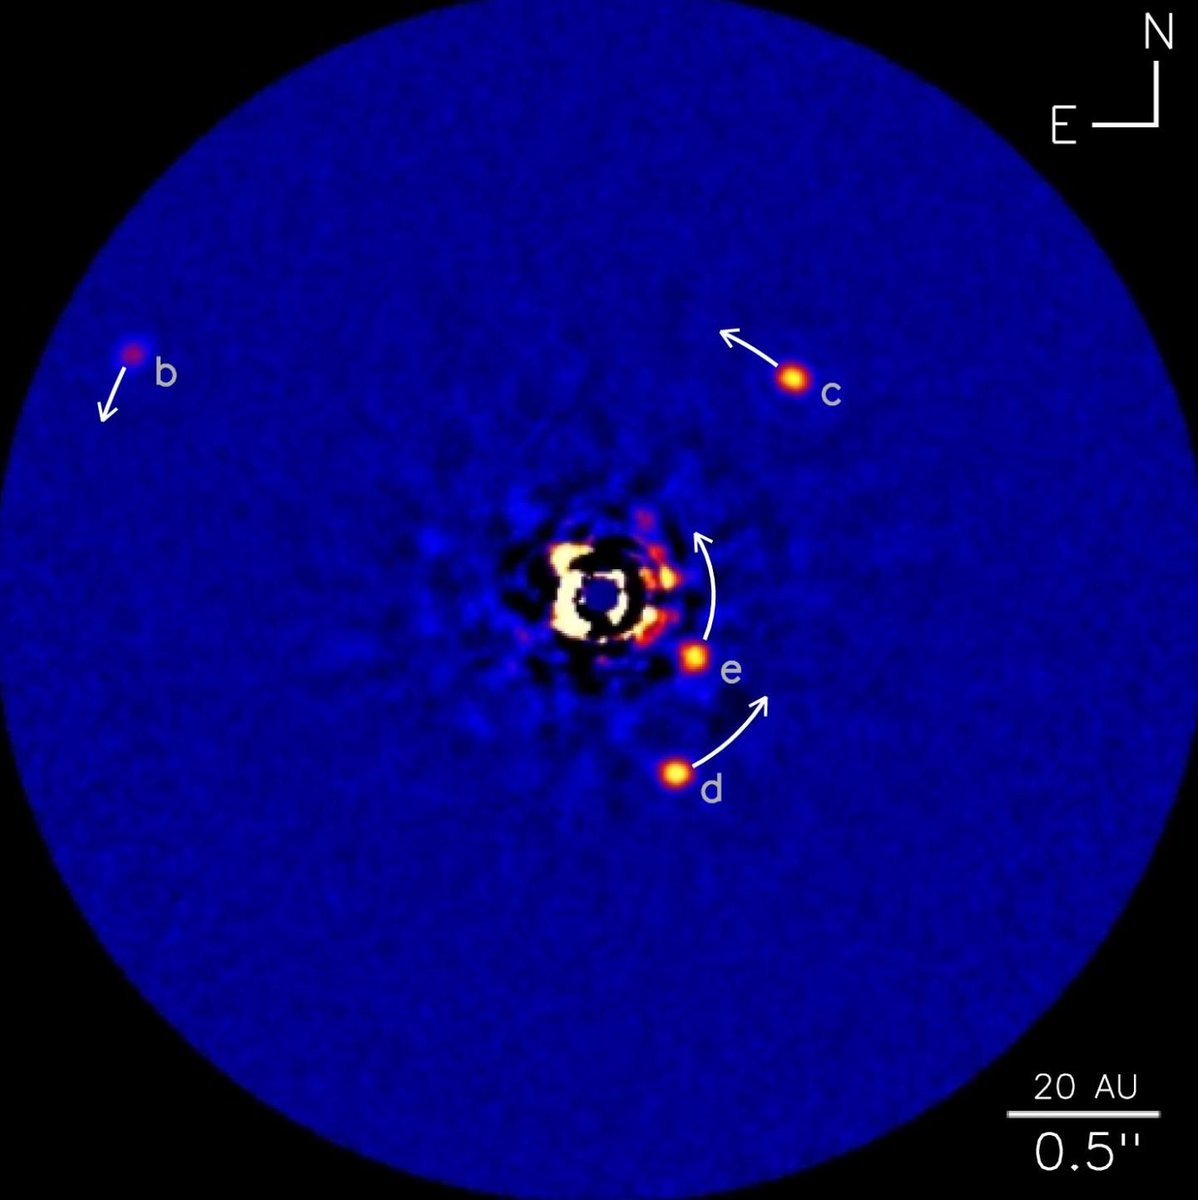 The HR 8799 system contains the first exoplanet be directly imaged. (NRC-HIA/C. MAROIS/W. M. KECK OBSERVATORY)